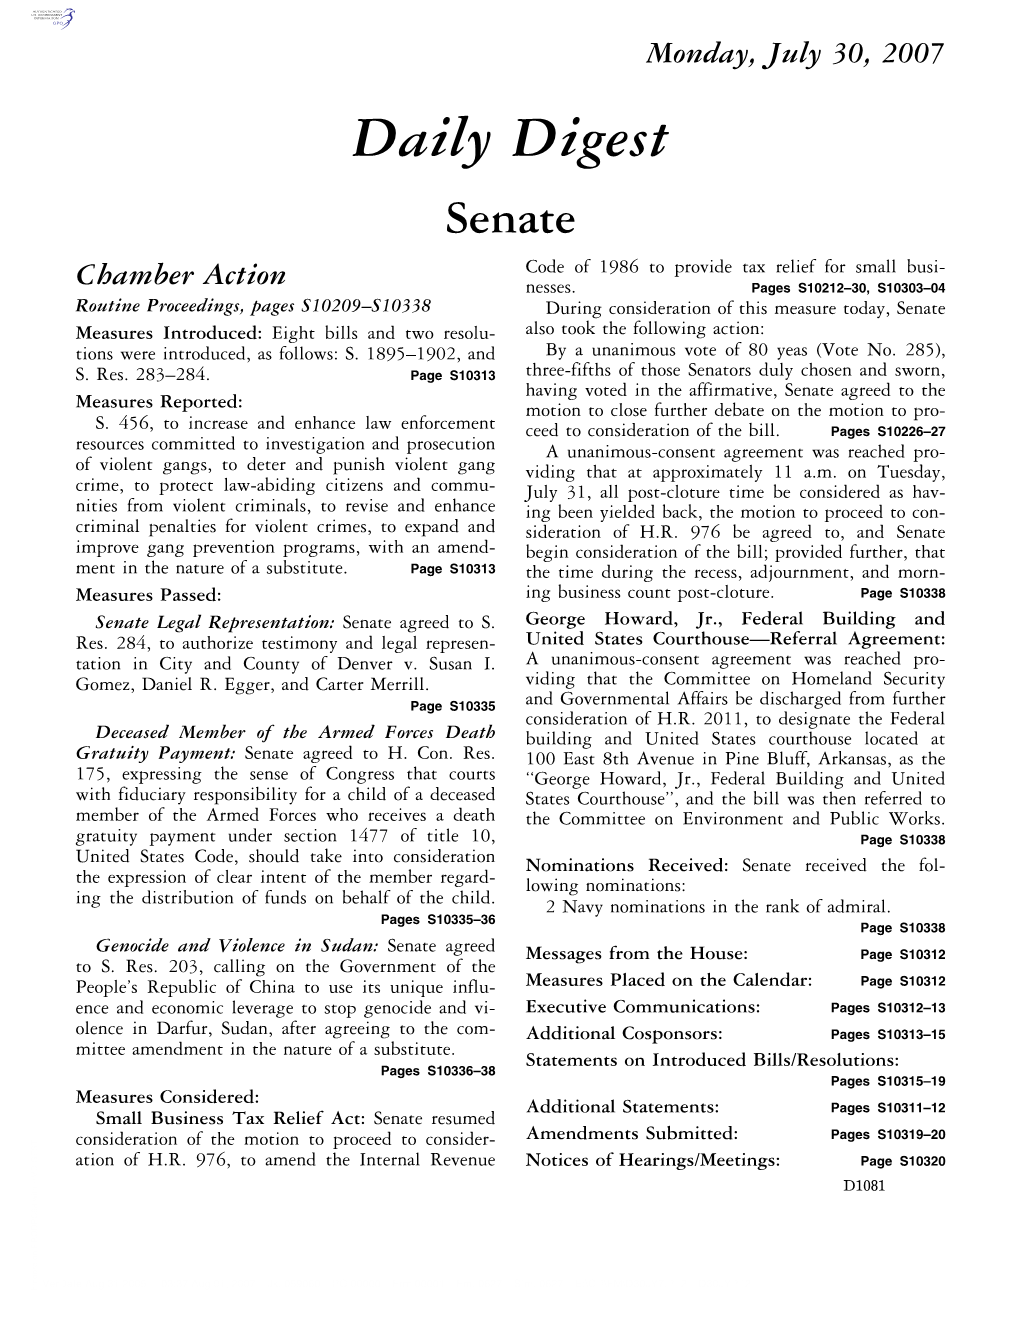 Daily Digest Senate Code of 1986 to Provide Tax Relief for Small Busi- Chamber Action Nesses